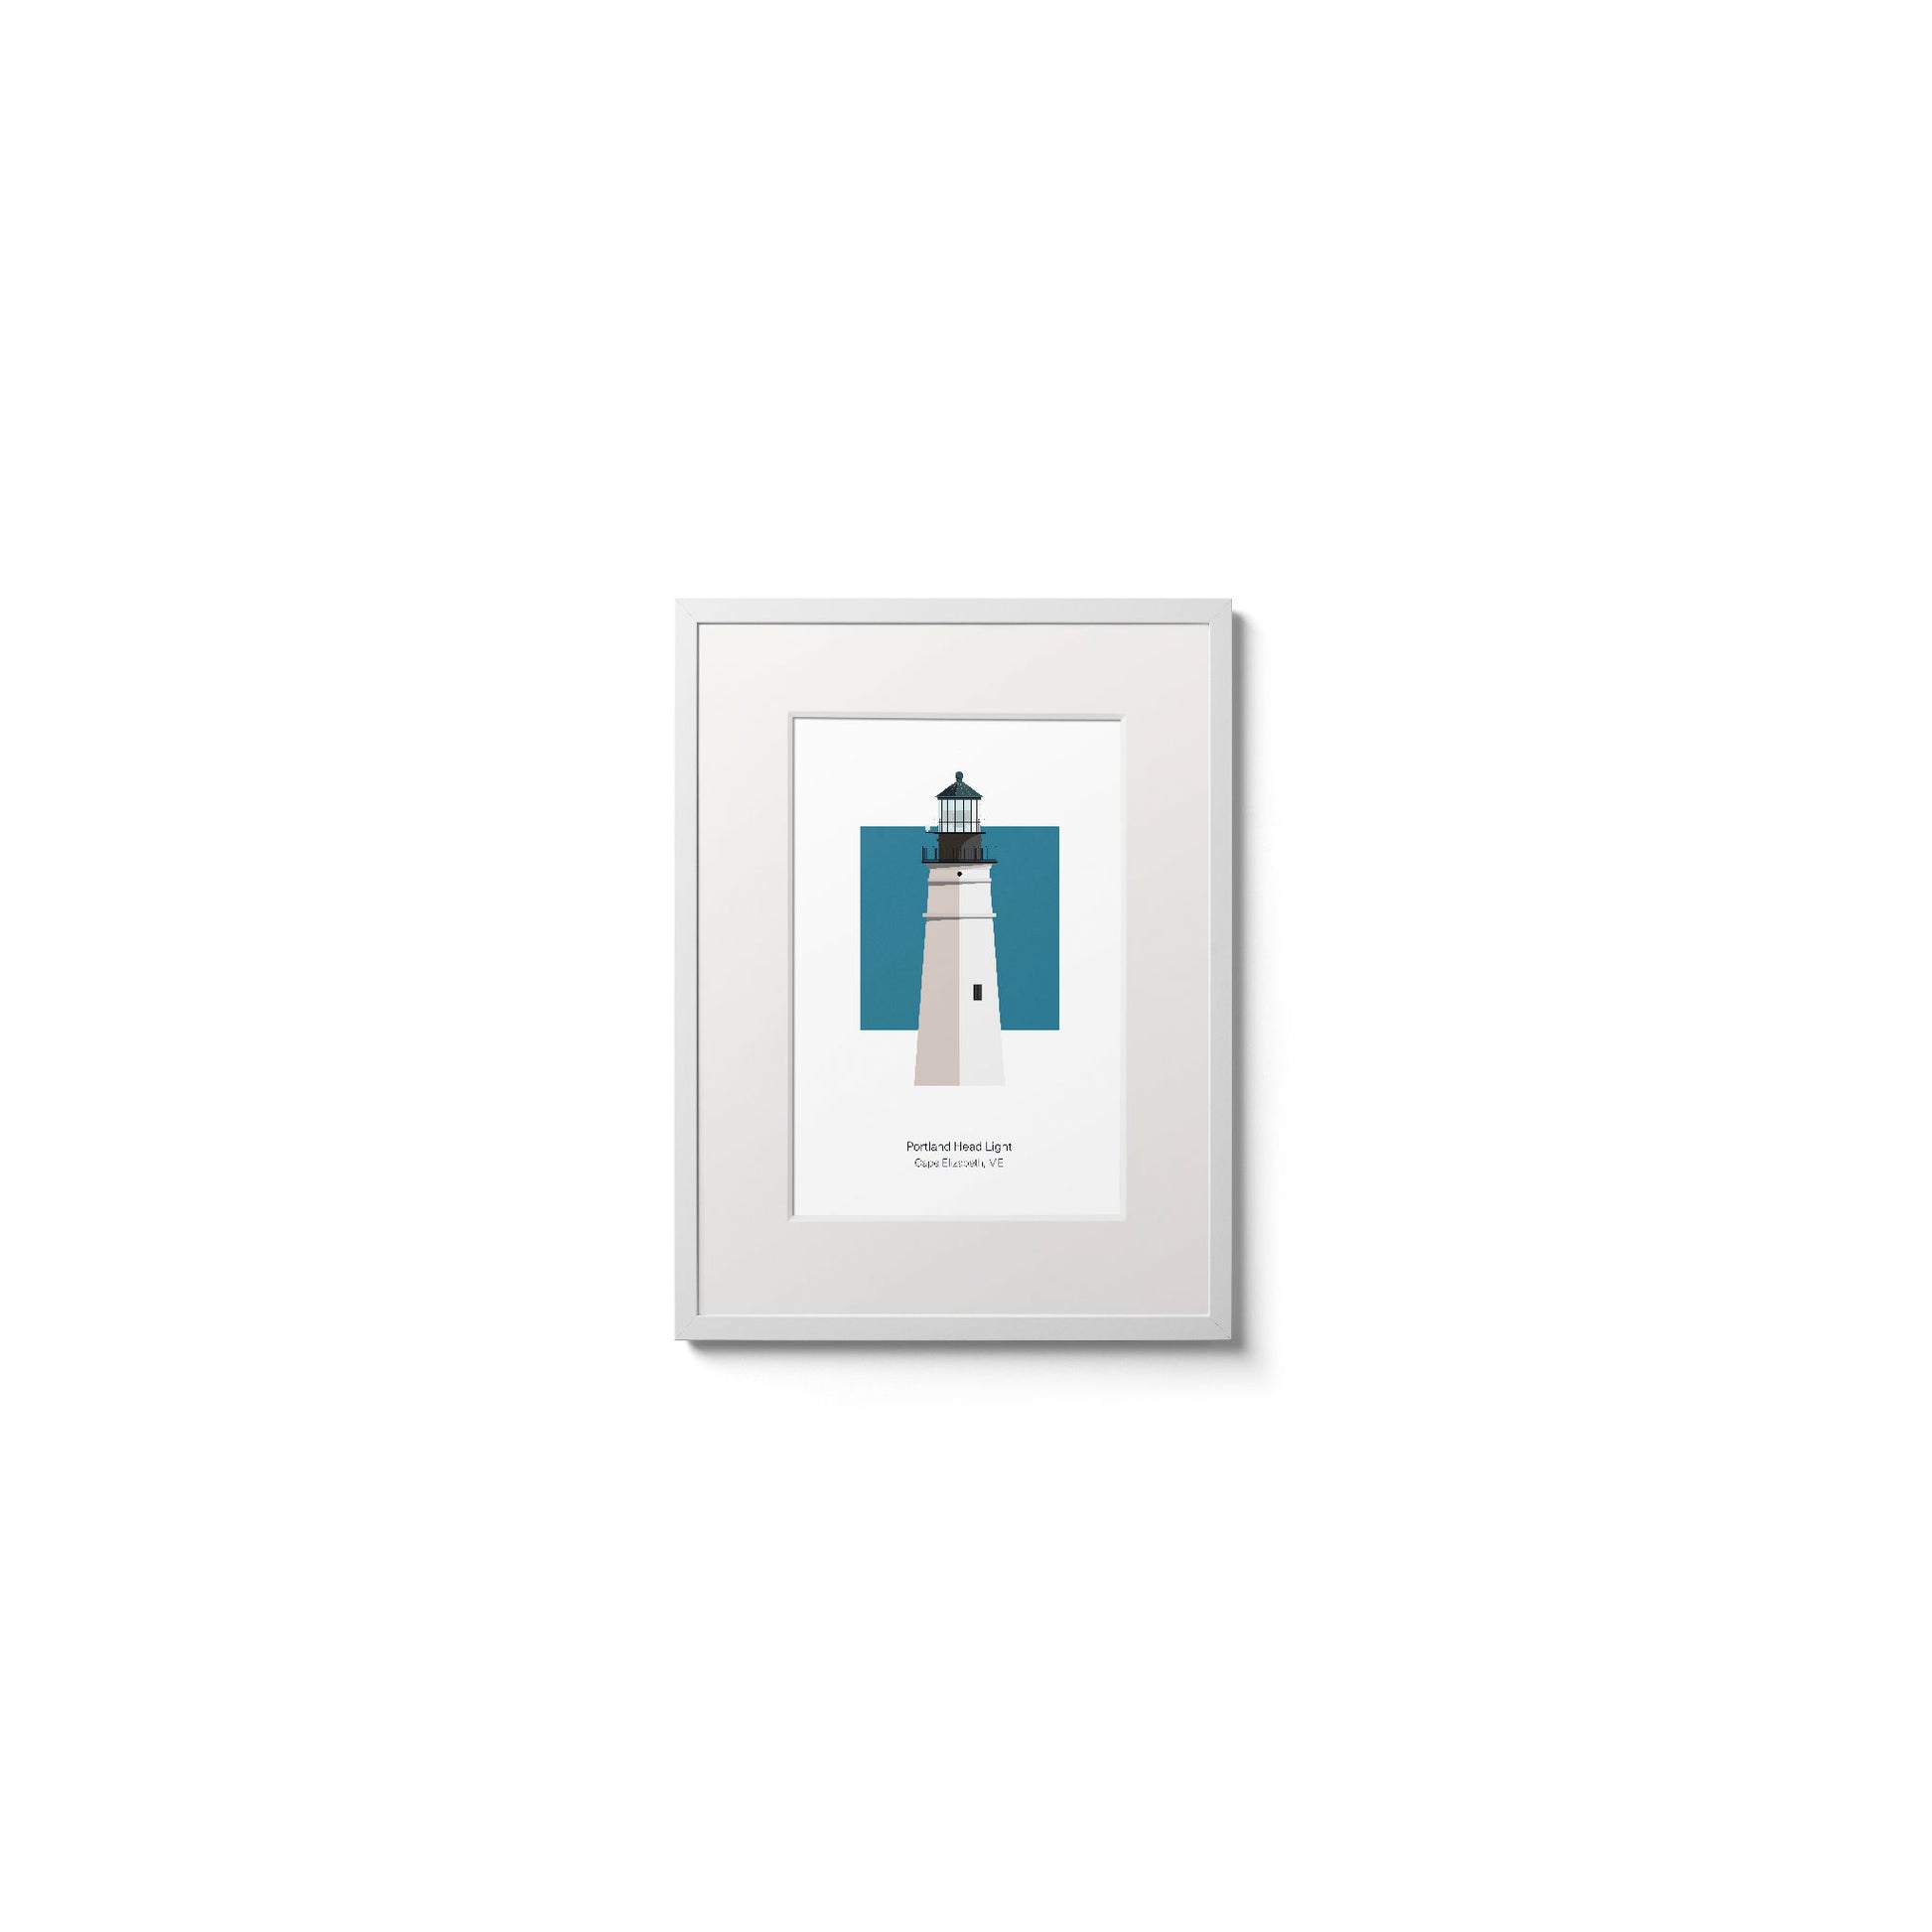 Illustration of the Portland Head lighthouse, Maine, USA. On a white background with aqua blue square as a backdrop., in a white frame  and measuring 6"x8" (15x20cm).